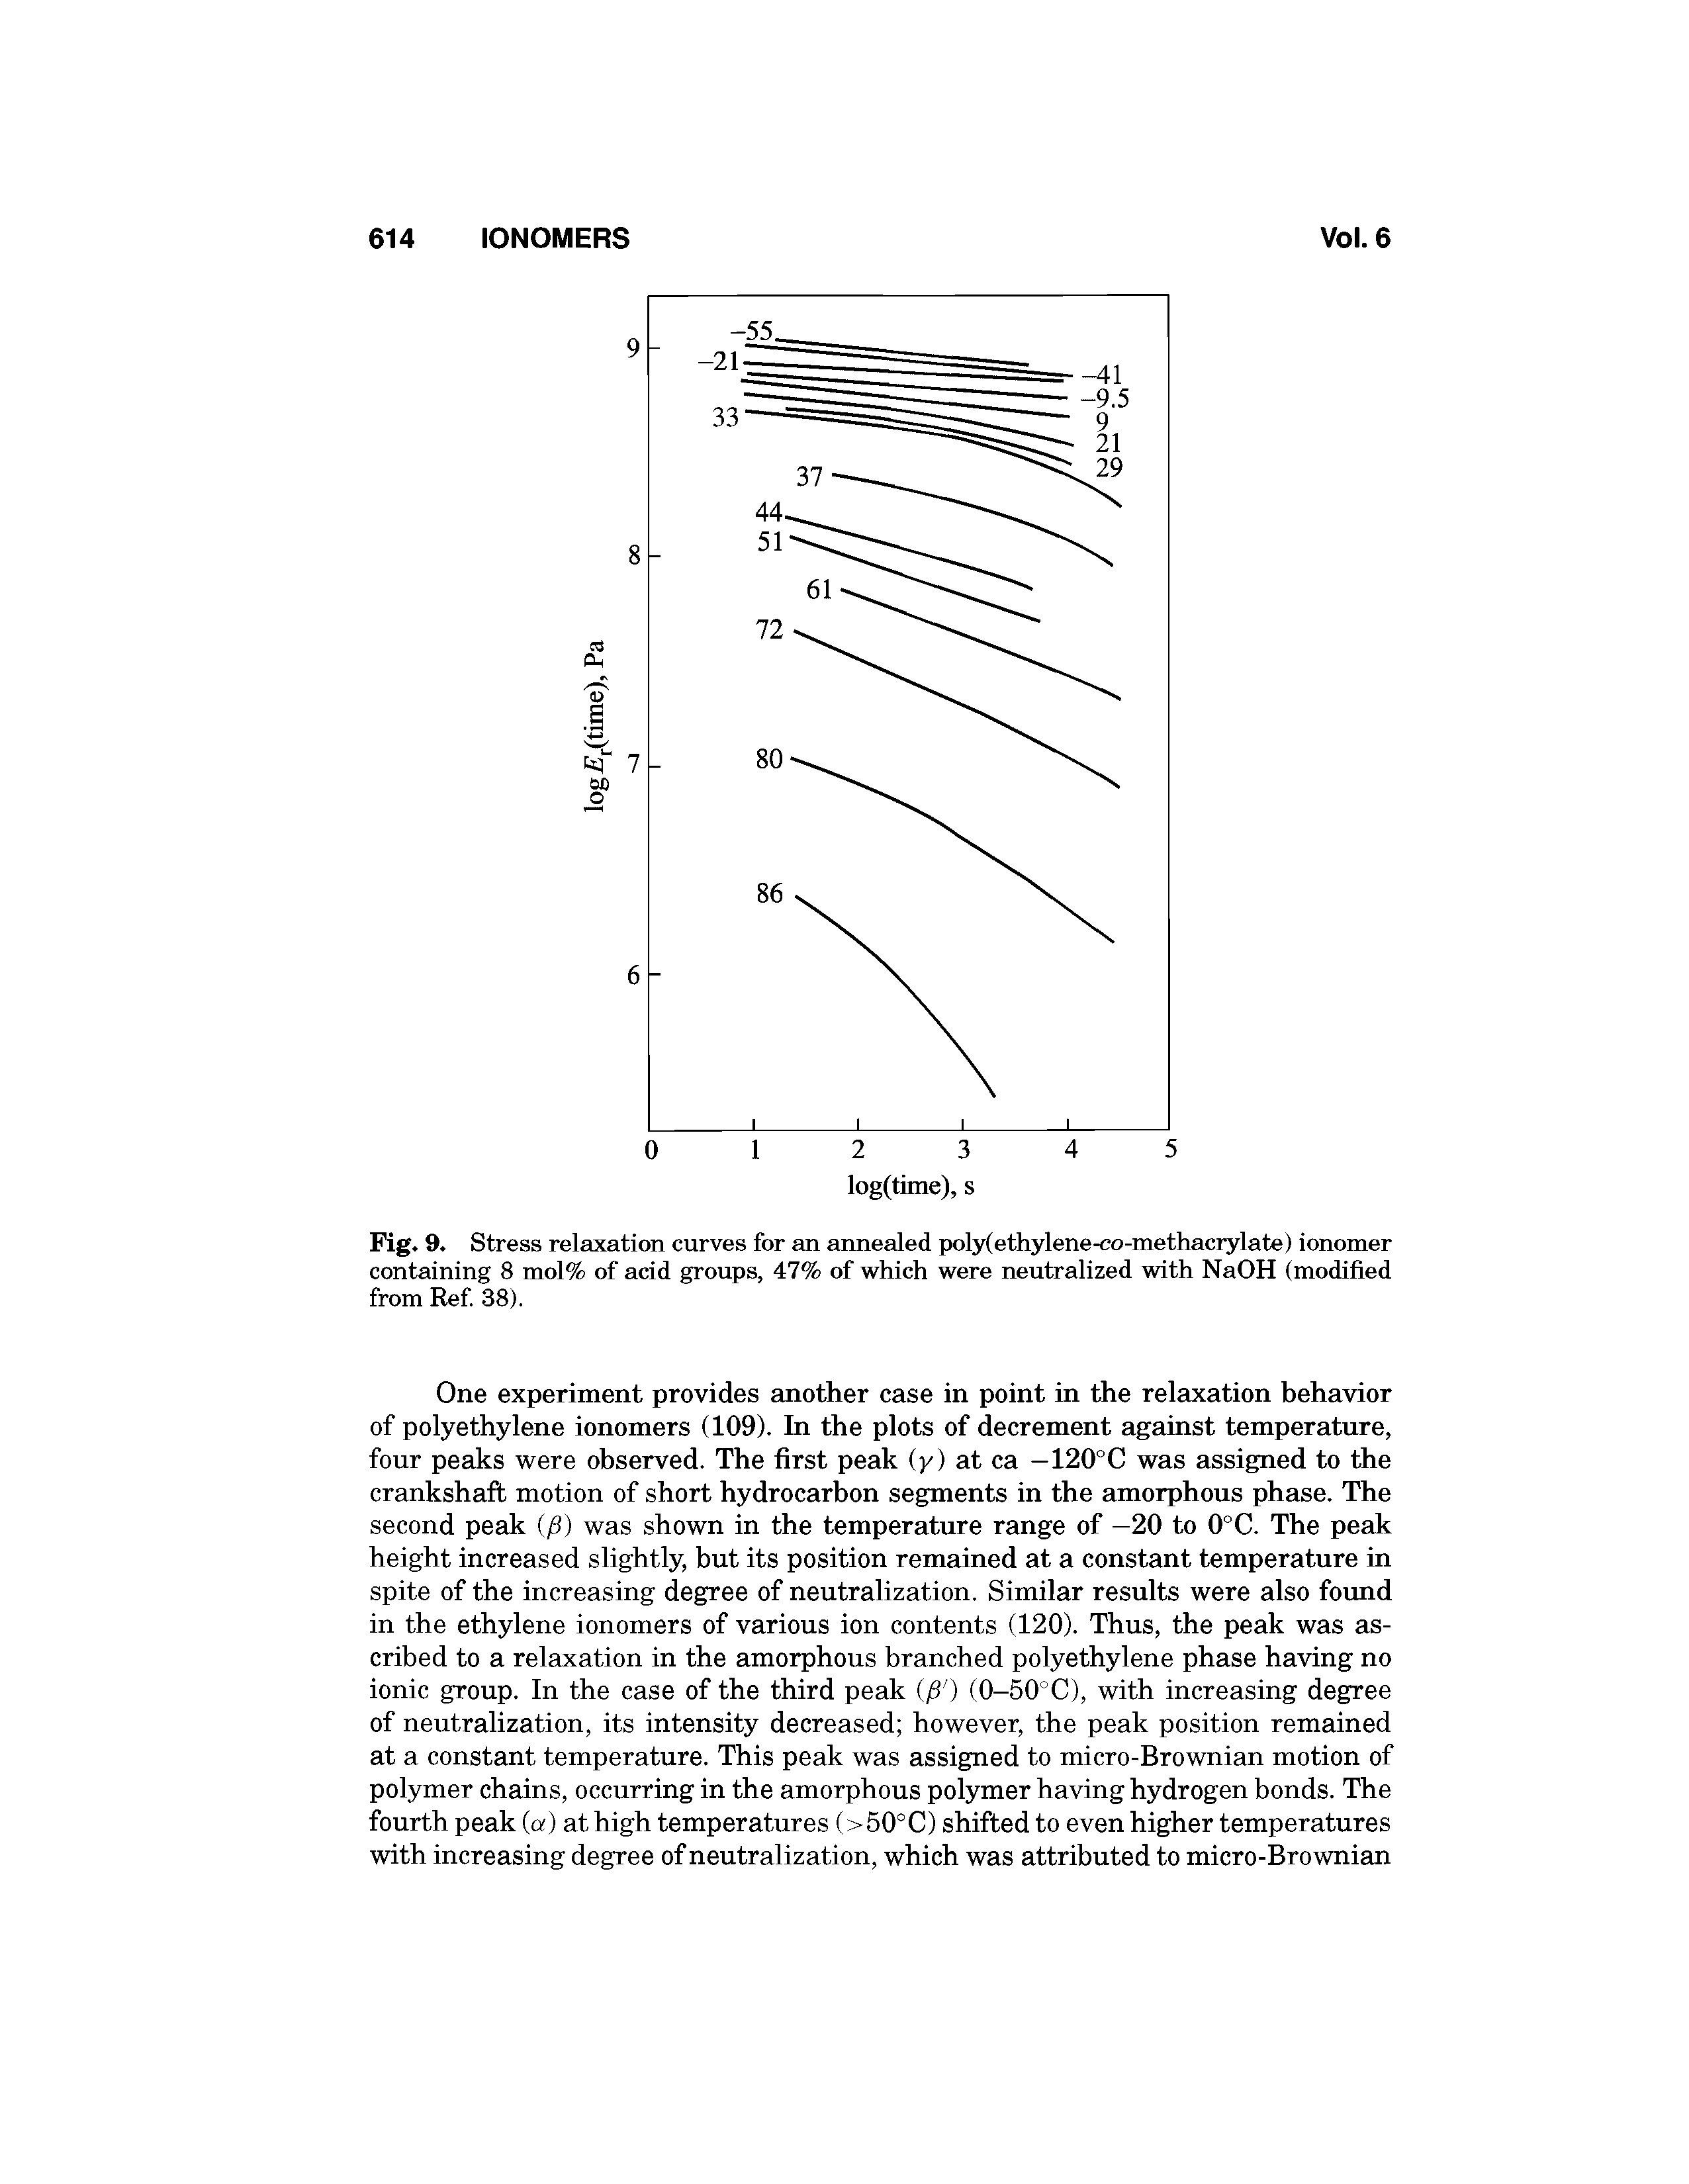 Fig. 9. Stress relaxation curves for an annealed polsKethylene-co-methaciylate) ionomer containing 8 mol% of acid groups, 47% of which were neutralized with NaOH (modified from Ref 38).